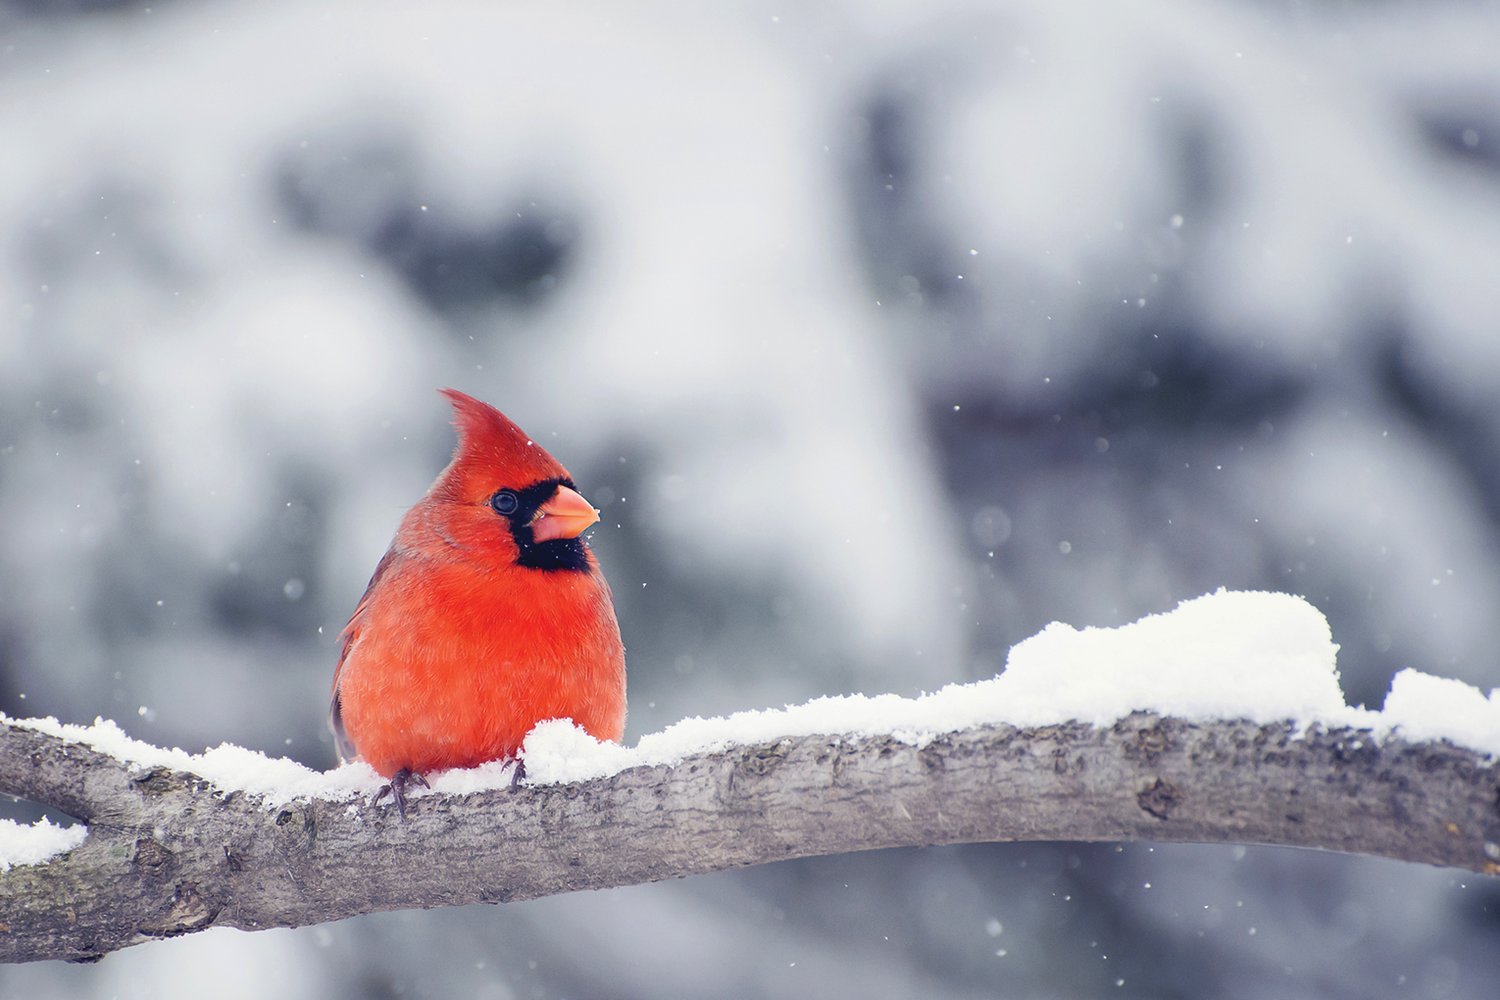 COLUMN: Attracting cardinals to your yard